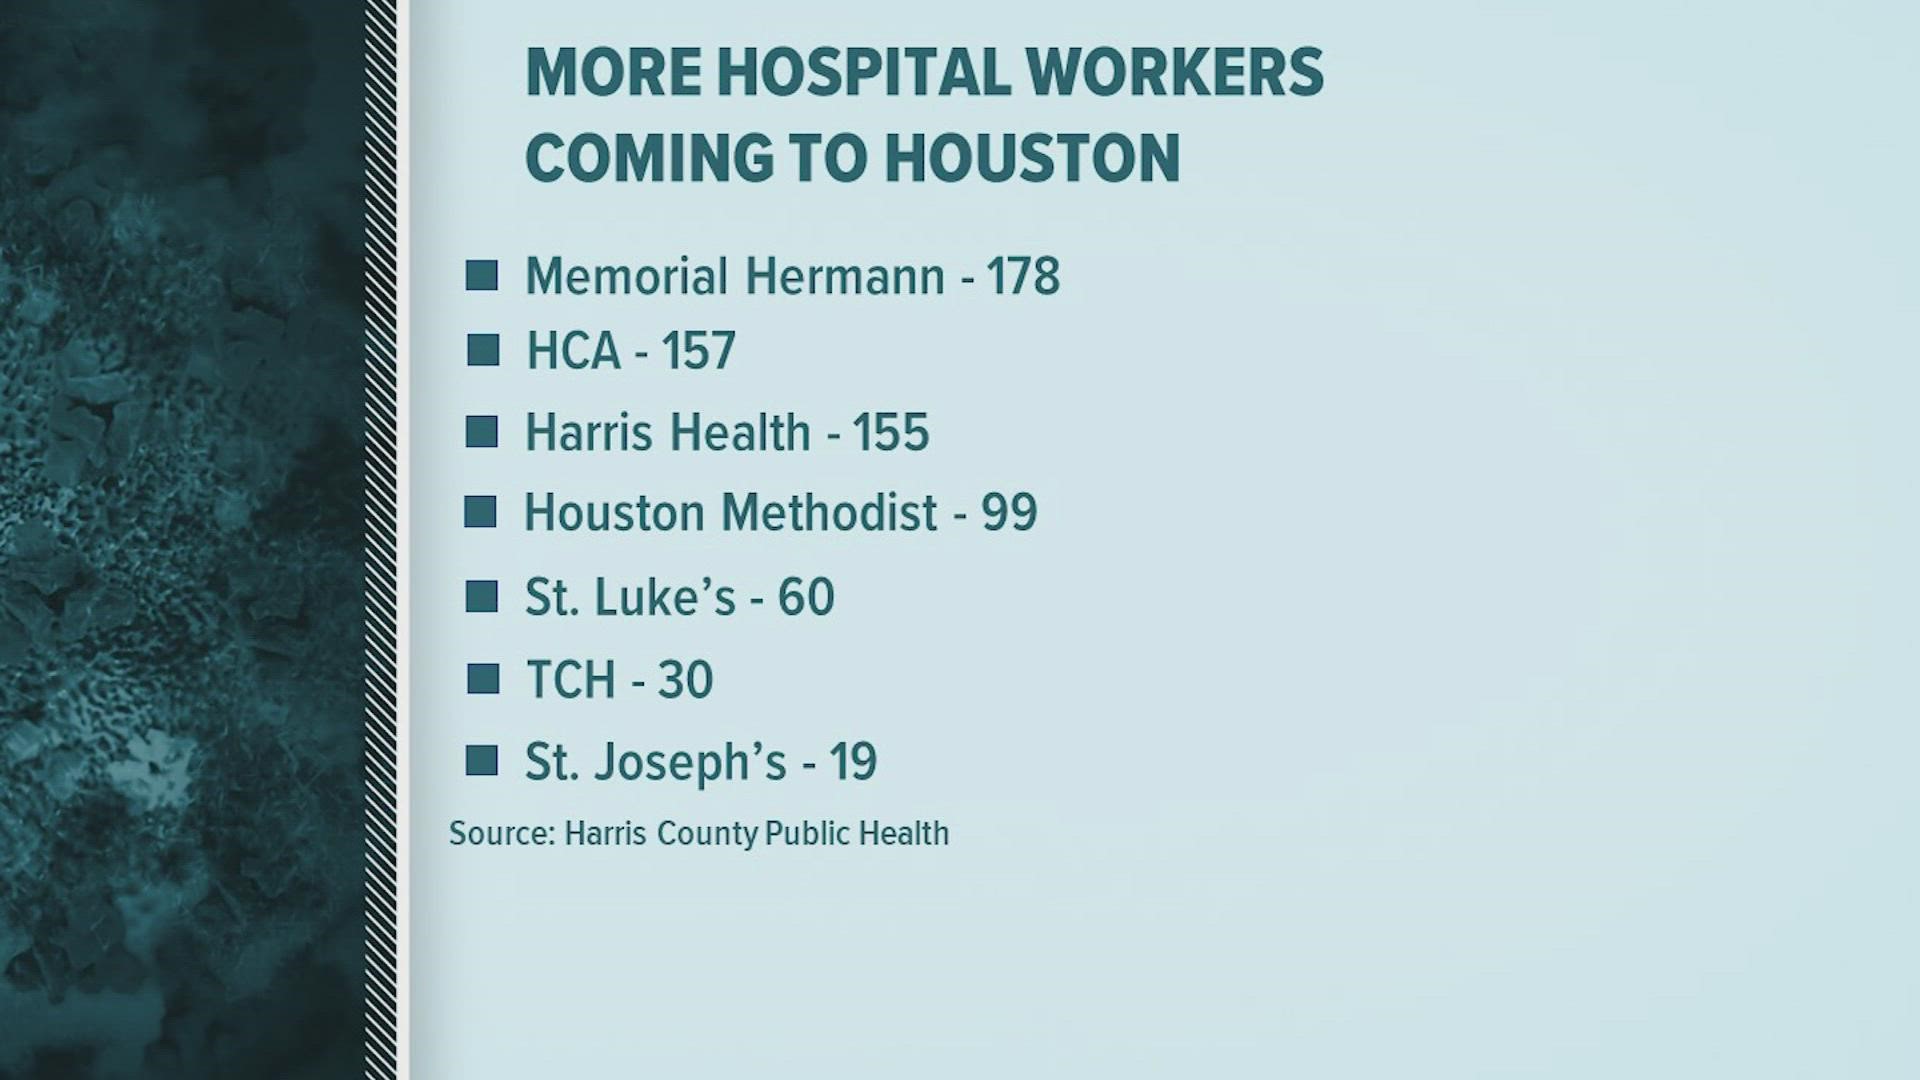 More than 600 hospital workers are coming to Houston to help the region fight COVID-19.